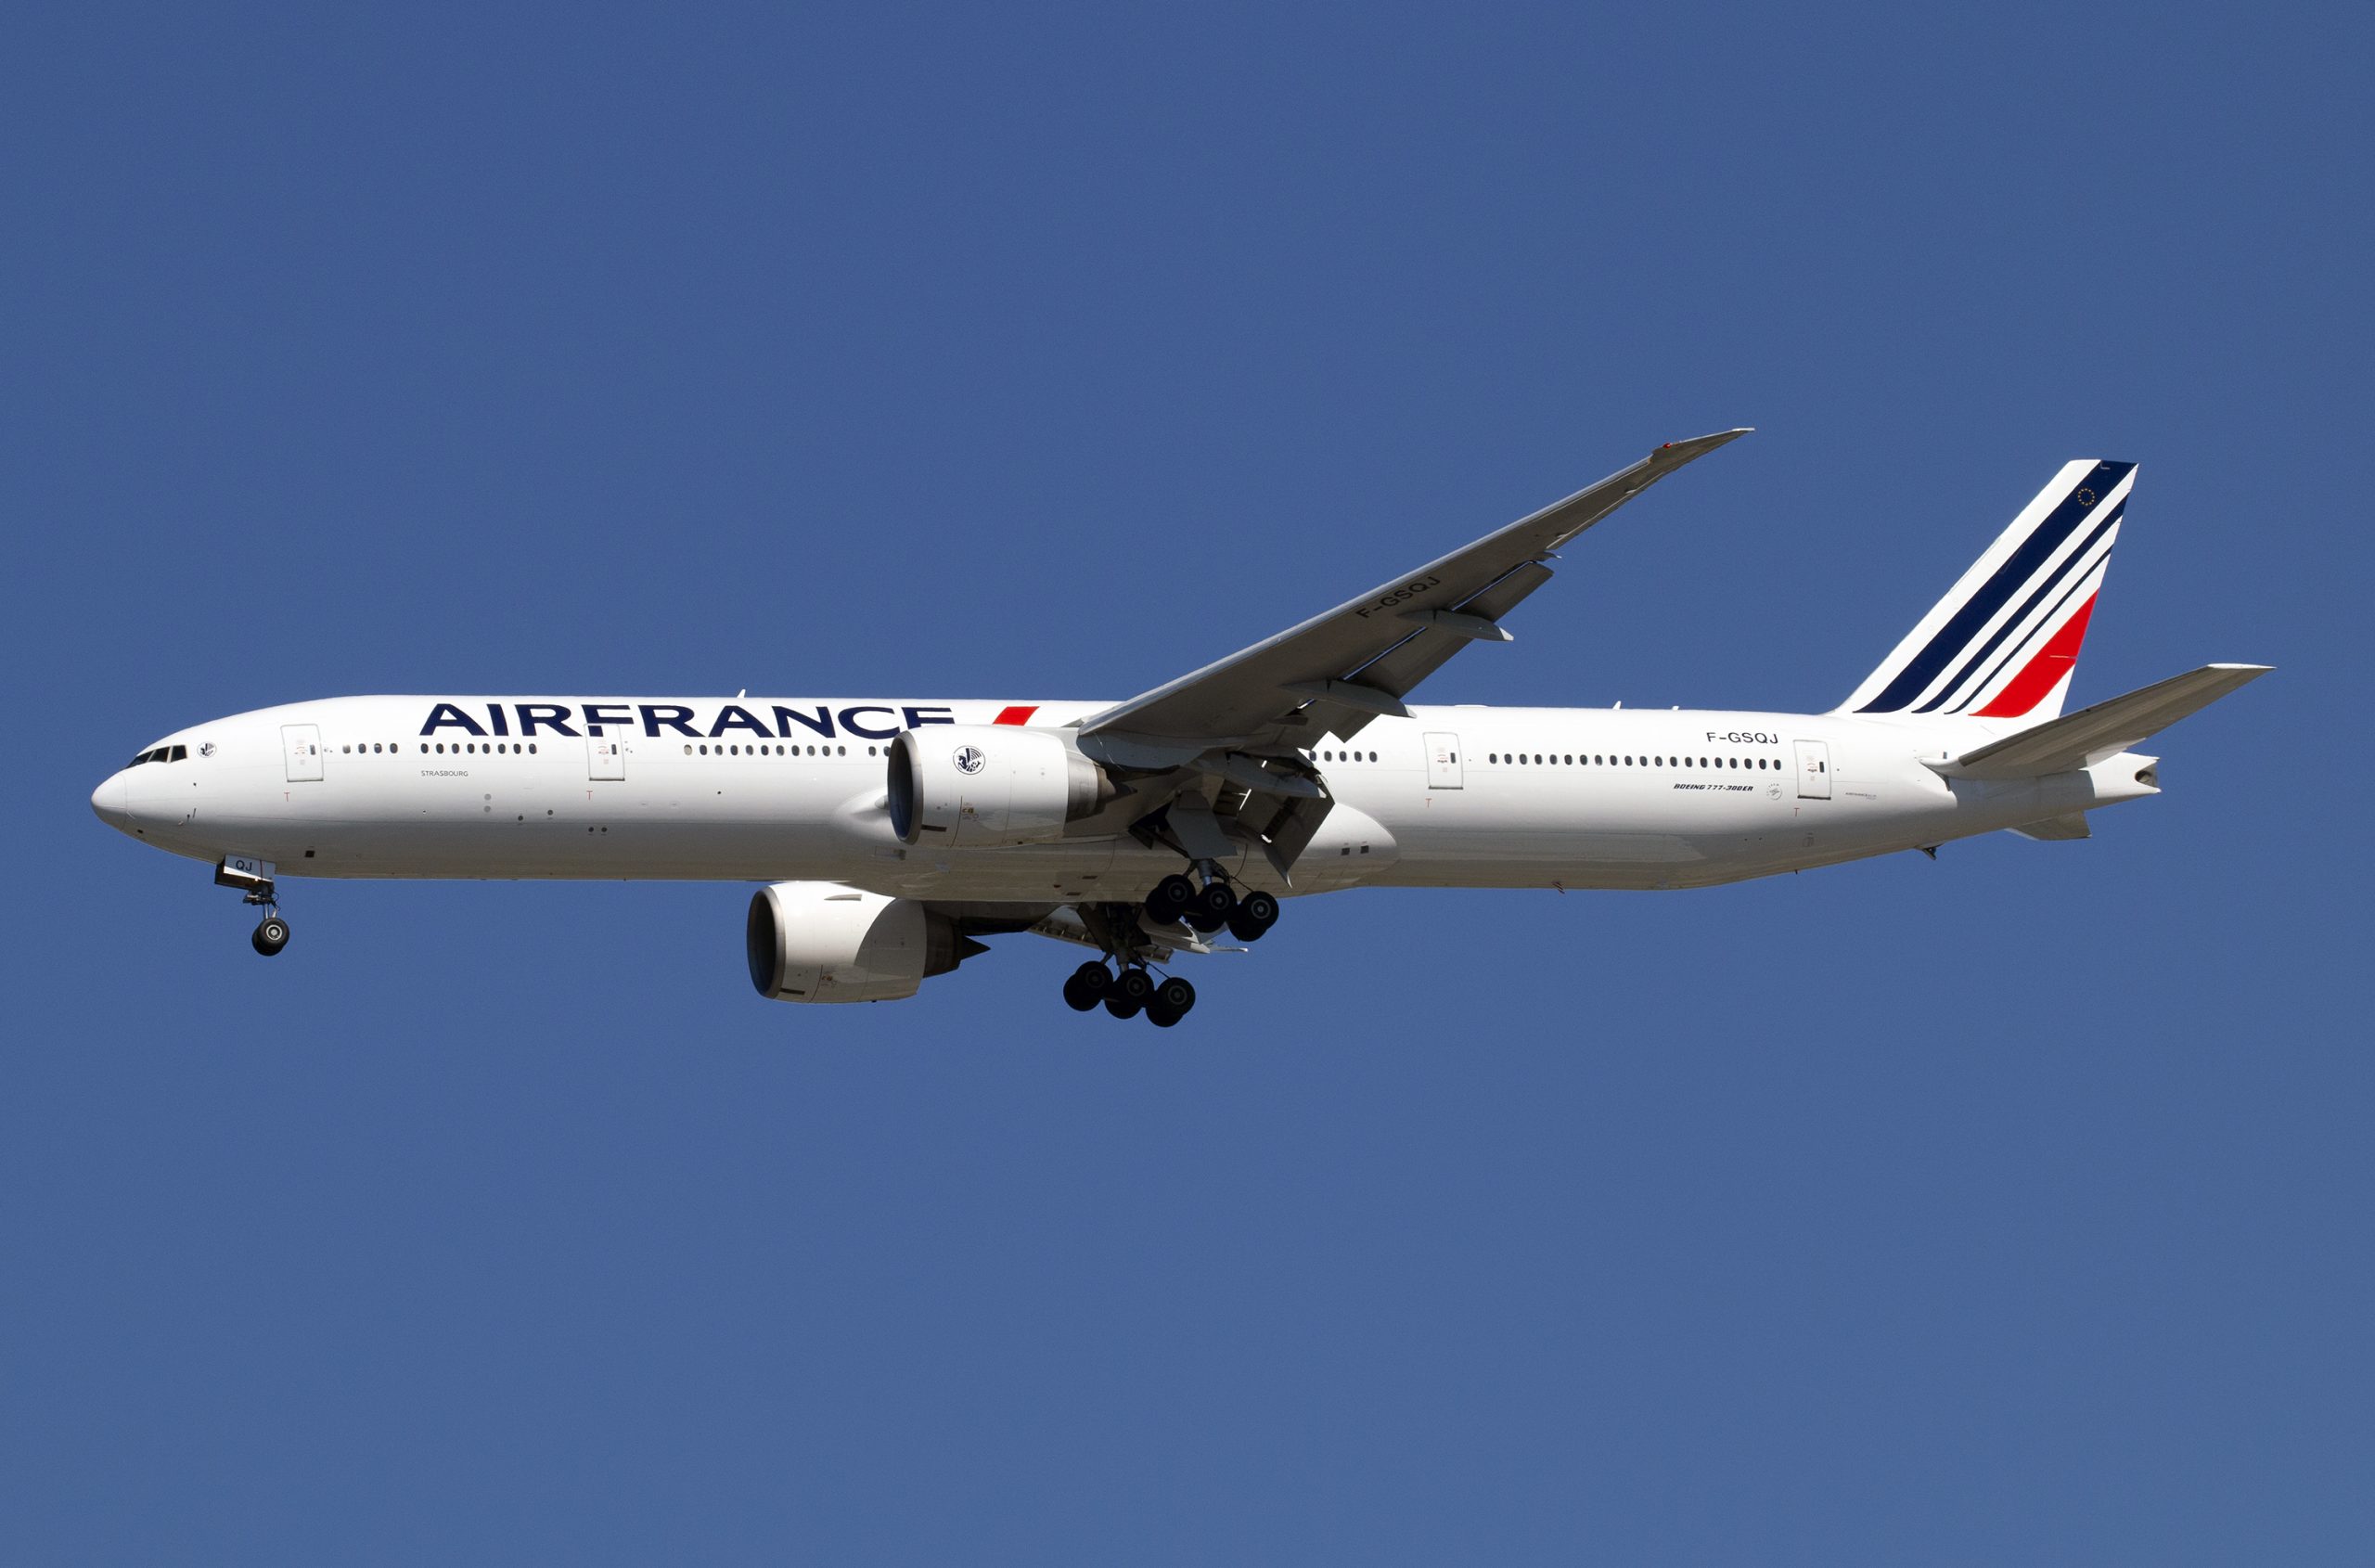 BREAKING Pilots of Air France #AF11 reported their Boeing 777 didn’t react to commands on final approach to Paris CDG